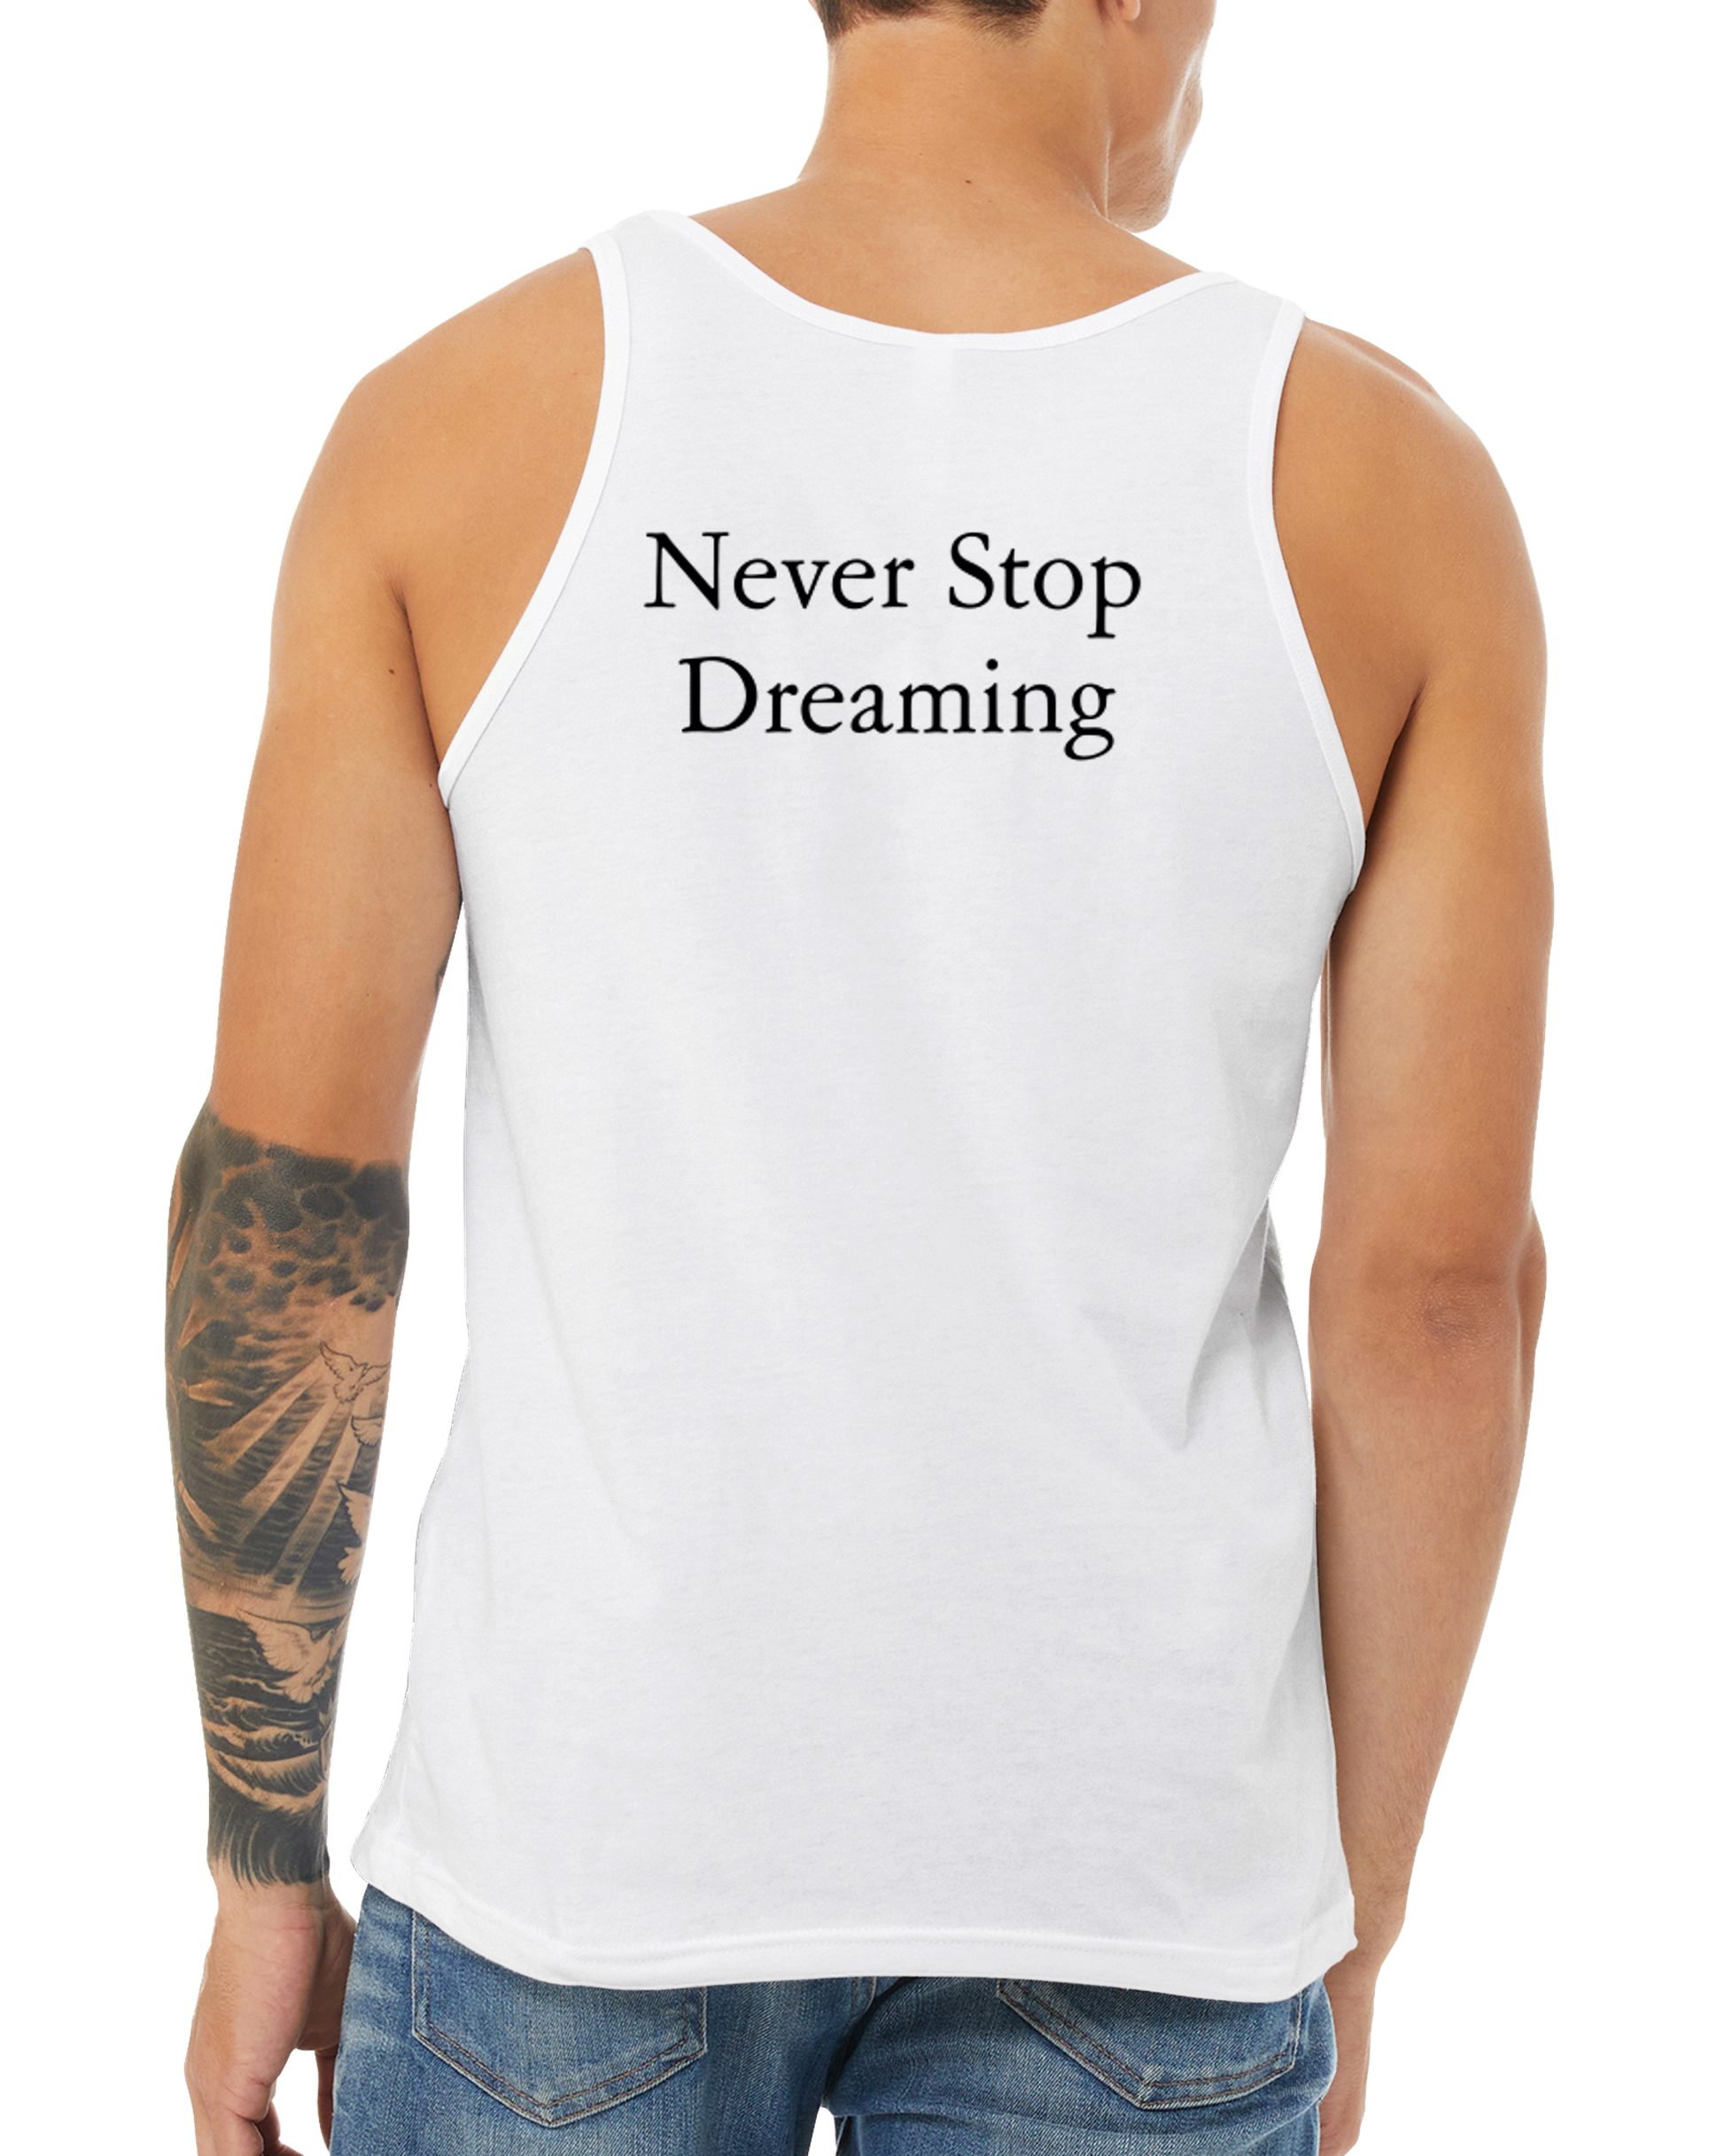 Hand Drawn Horse || Unisex Tank Top- Design "Get over it"; Static Design; Personalizable Back Text